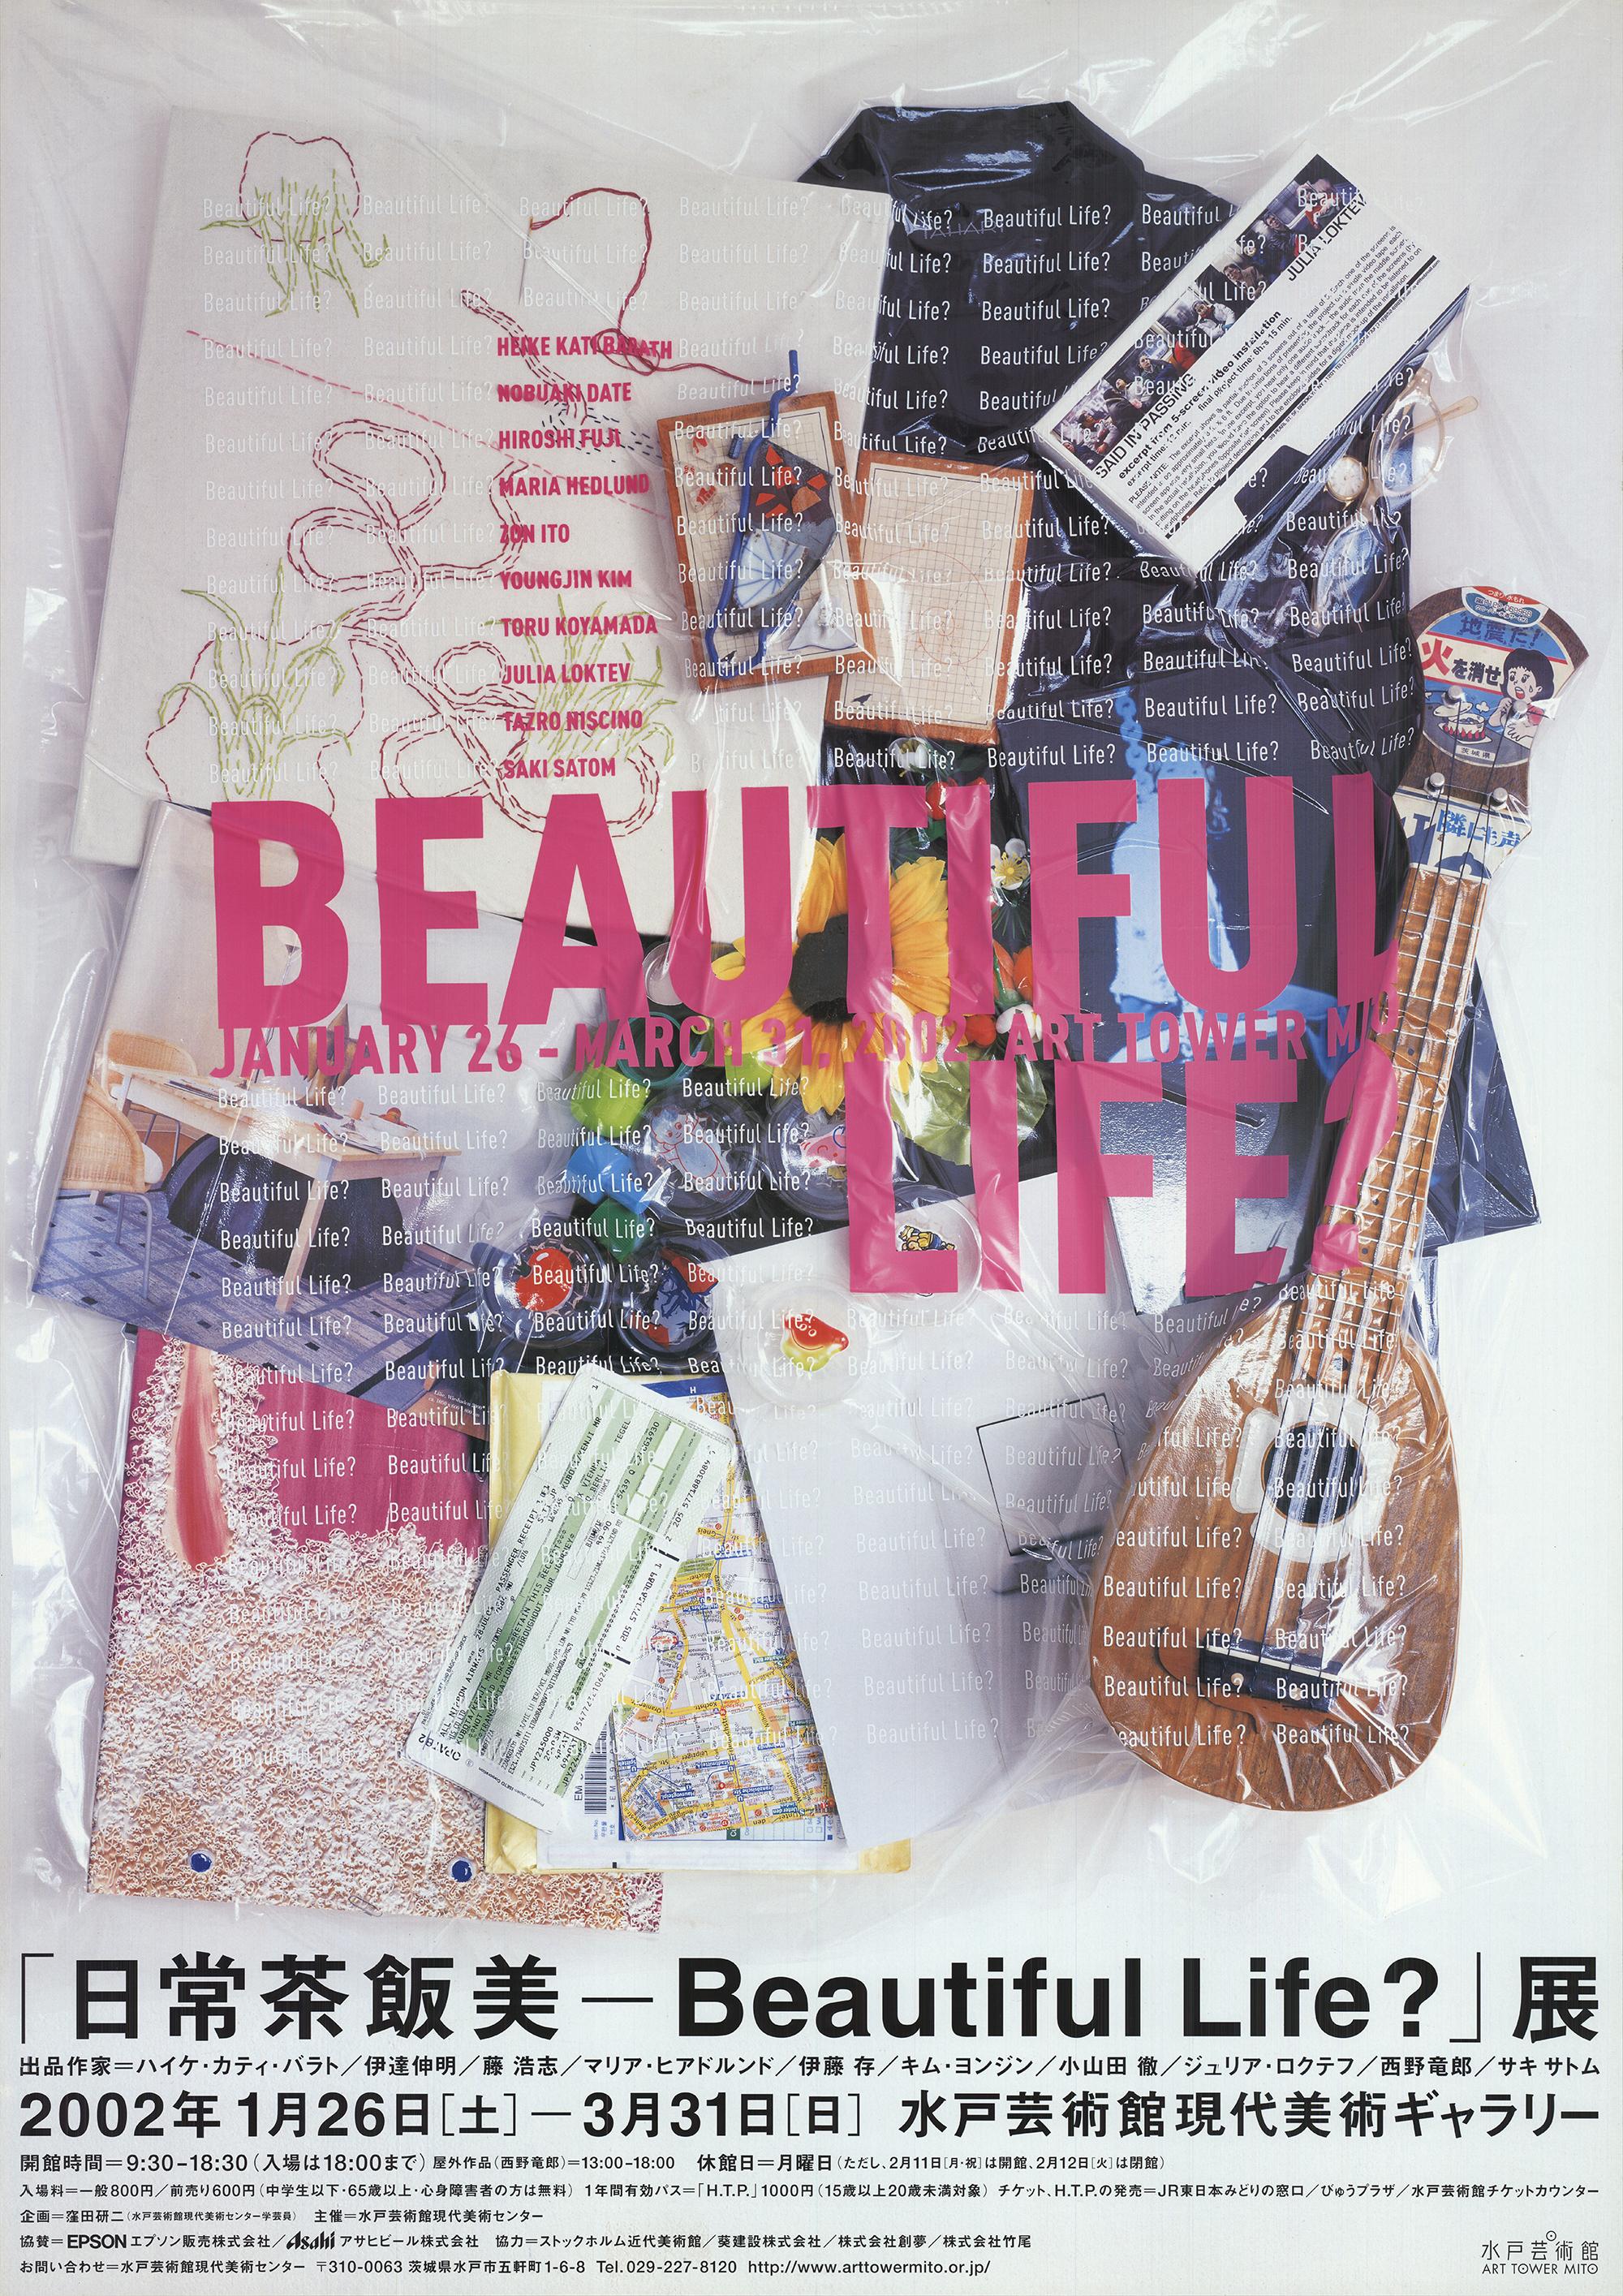 ZON ITO Beautiful Life? 40.5" x 28.75" Offset Lithograph 2002 Multicolor, Pink - Print by Zon Ito